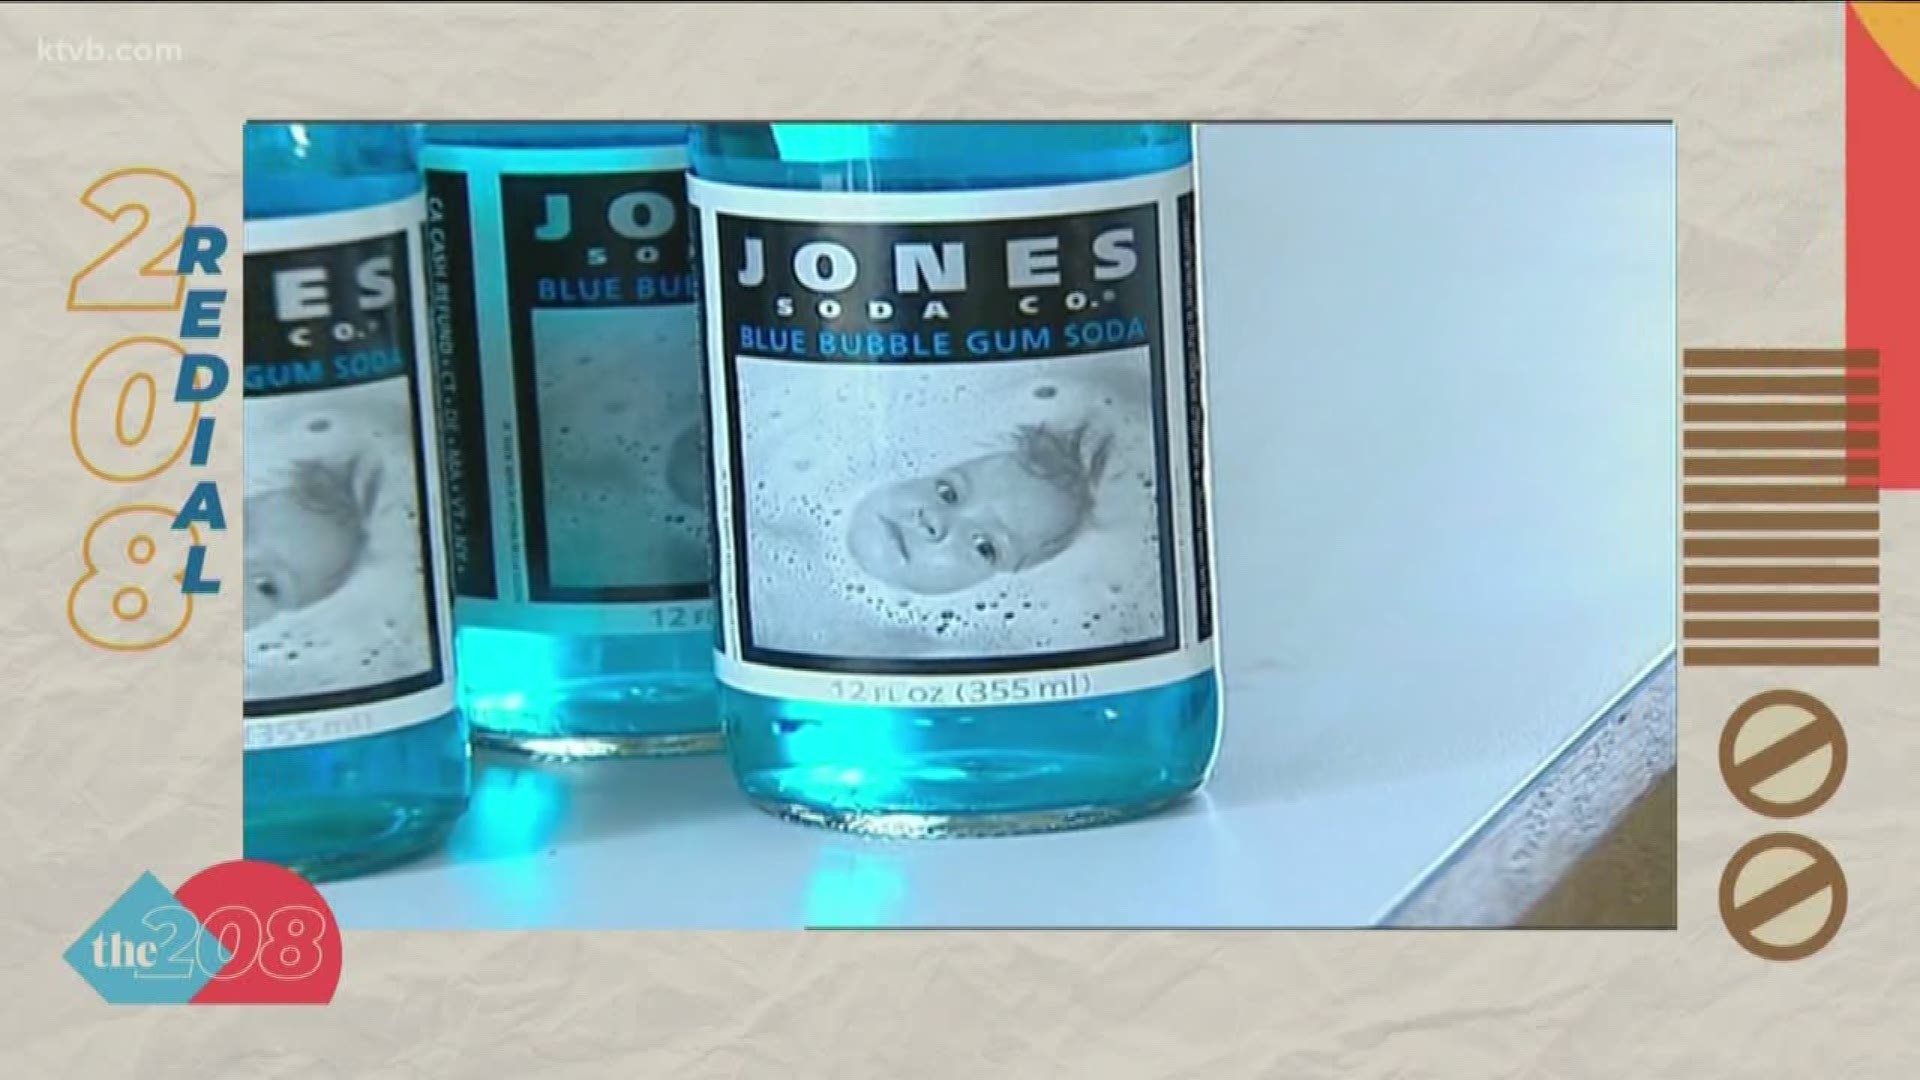 We go back to the year 2001 when John Miller introduced us to the Jones Soda girl.